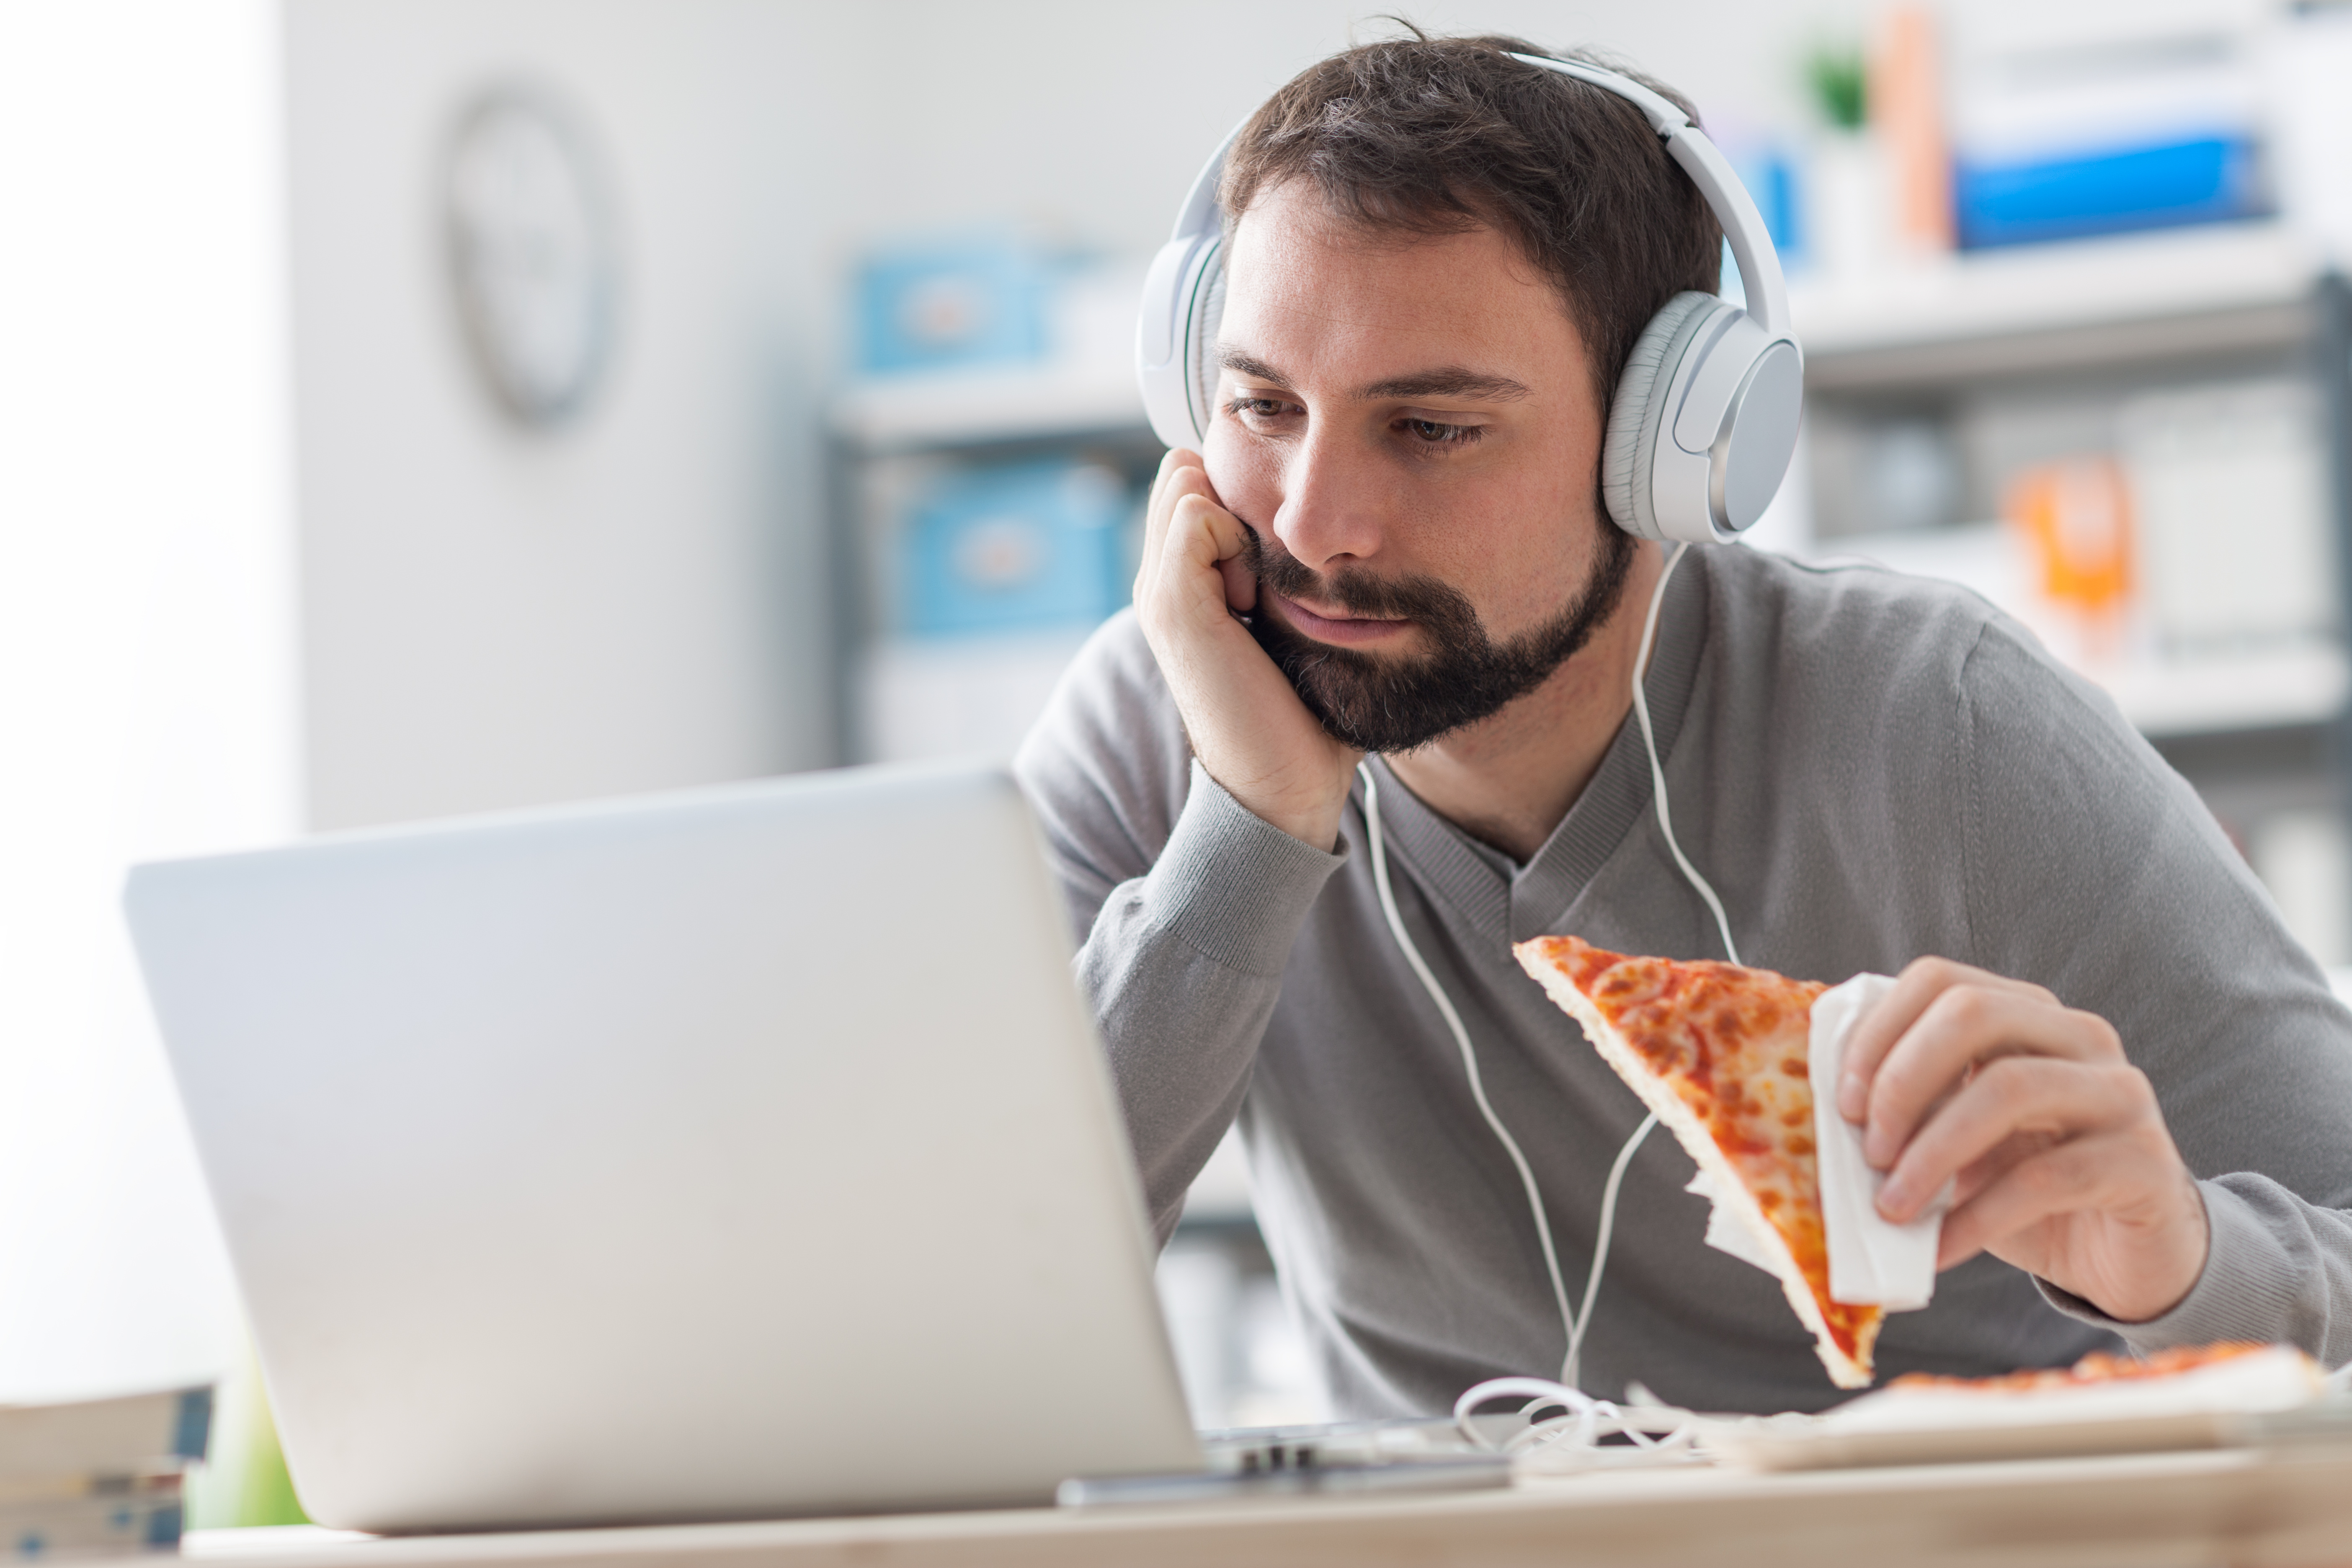 Lazy man having pizza for lunch at his work office desk